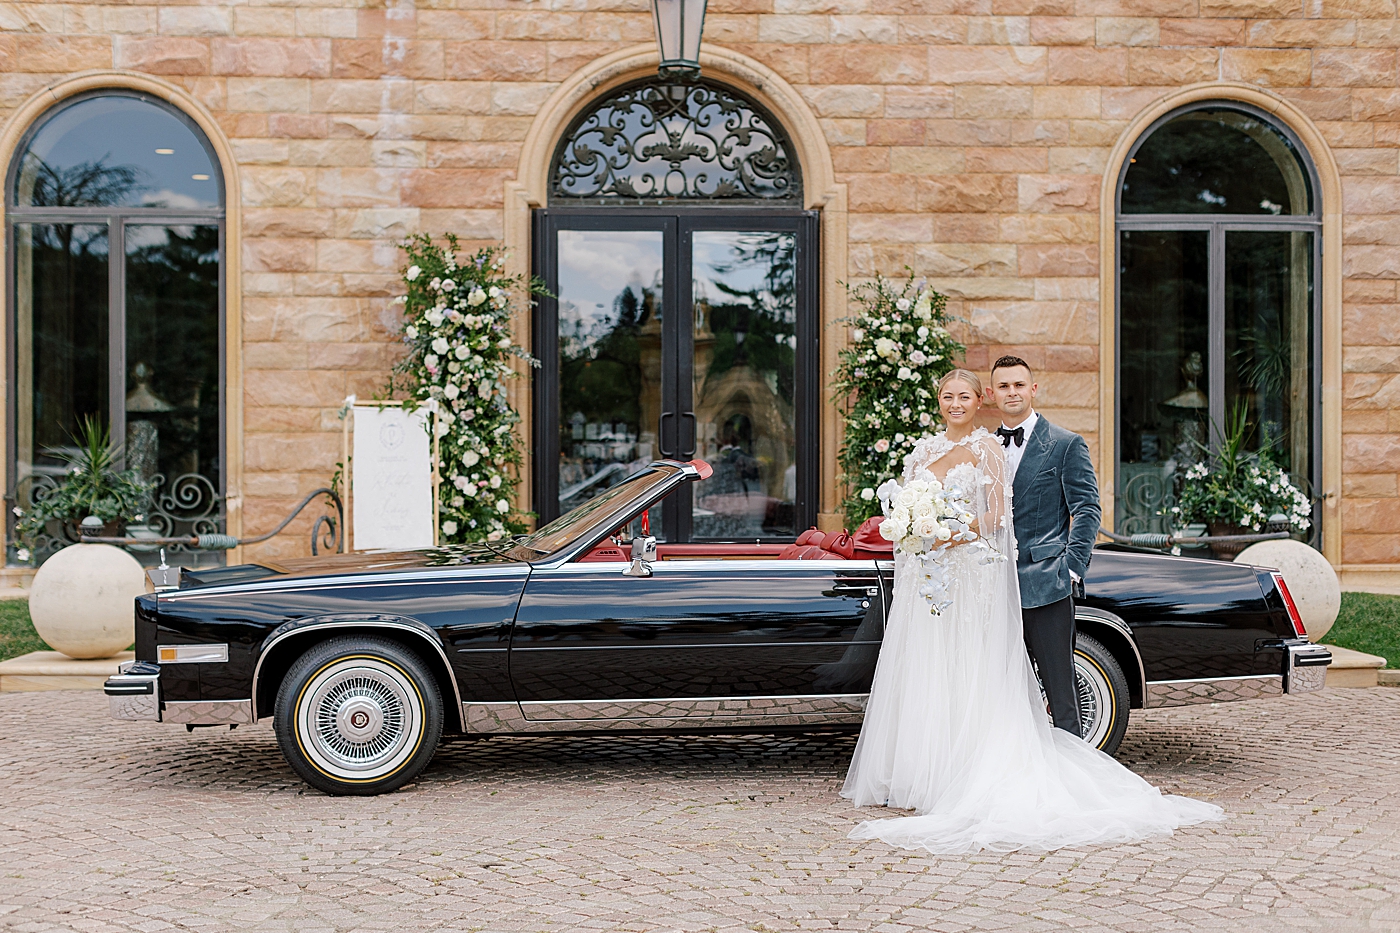 Bride and groom near vintage black car | Image by Hope Helmuth Photography